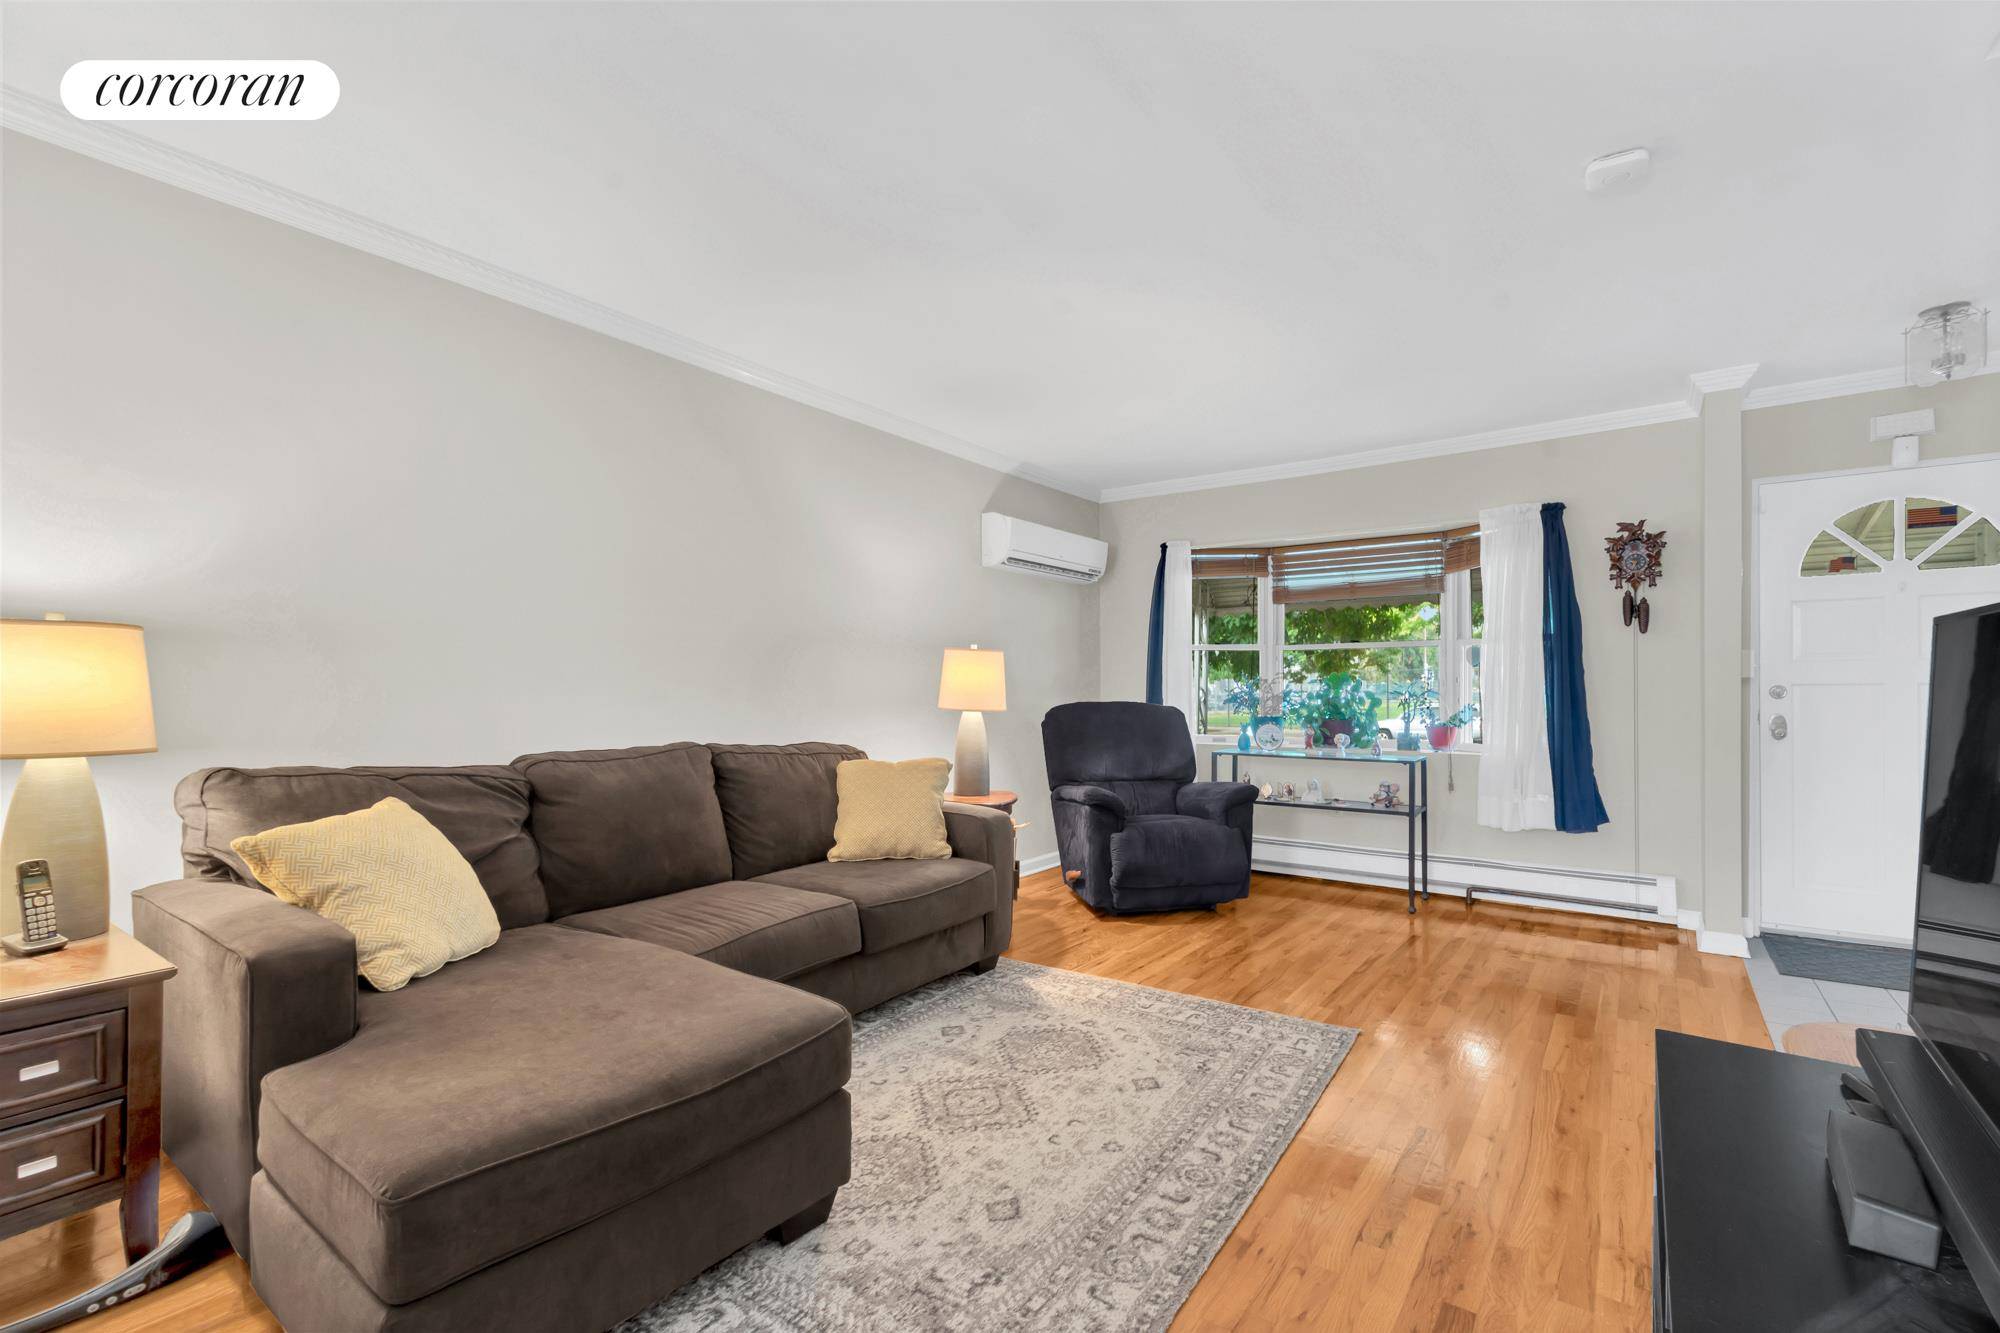 This stunning well maintained and tranquil home is in the Throgs Neck area of the Bronx and it is just the place you want to call home.